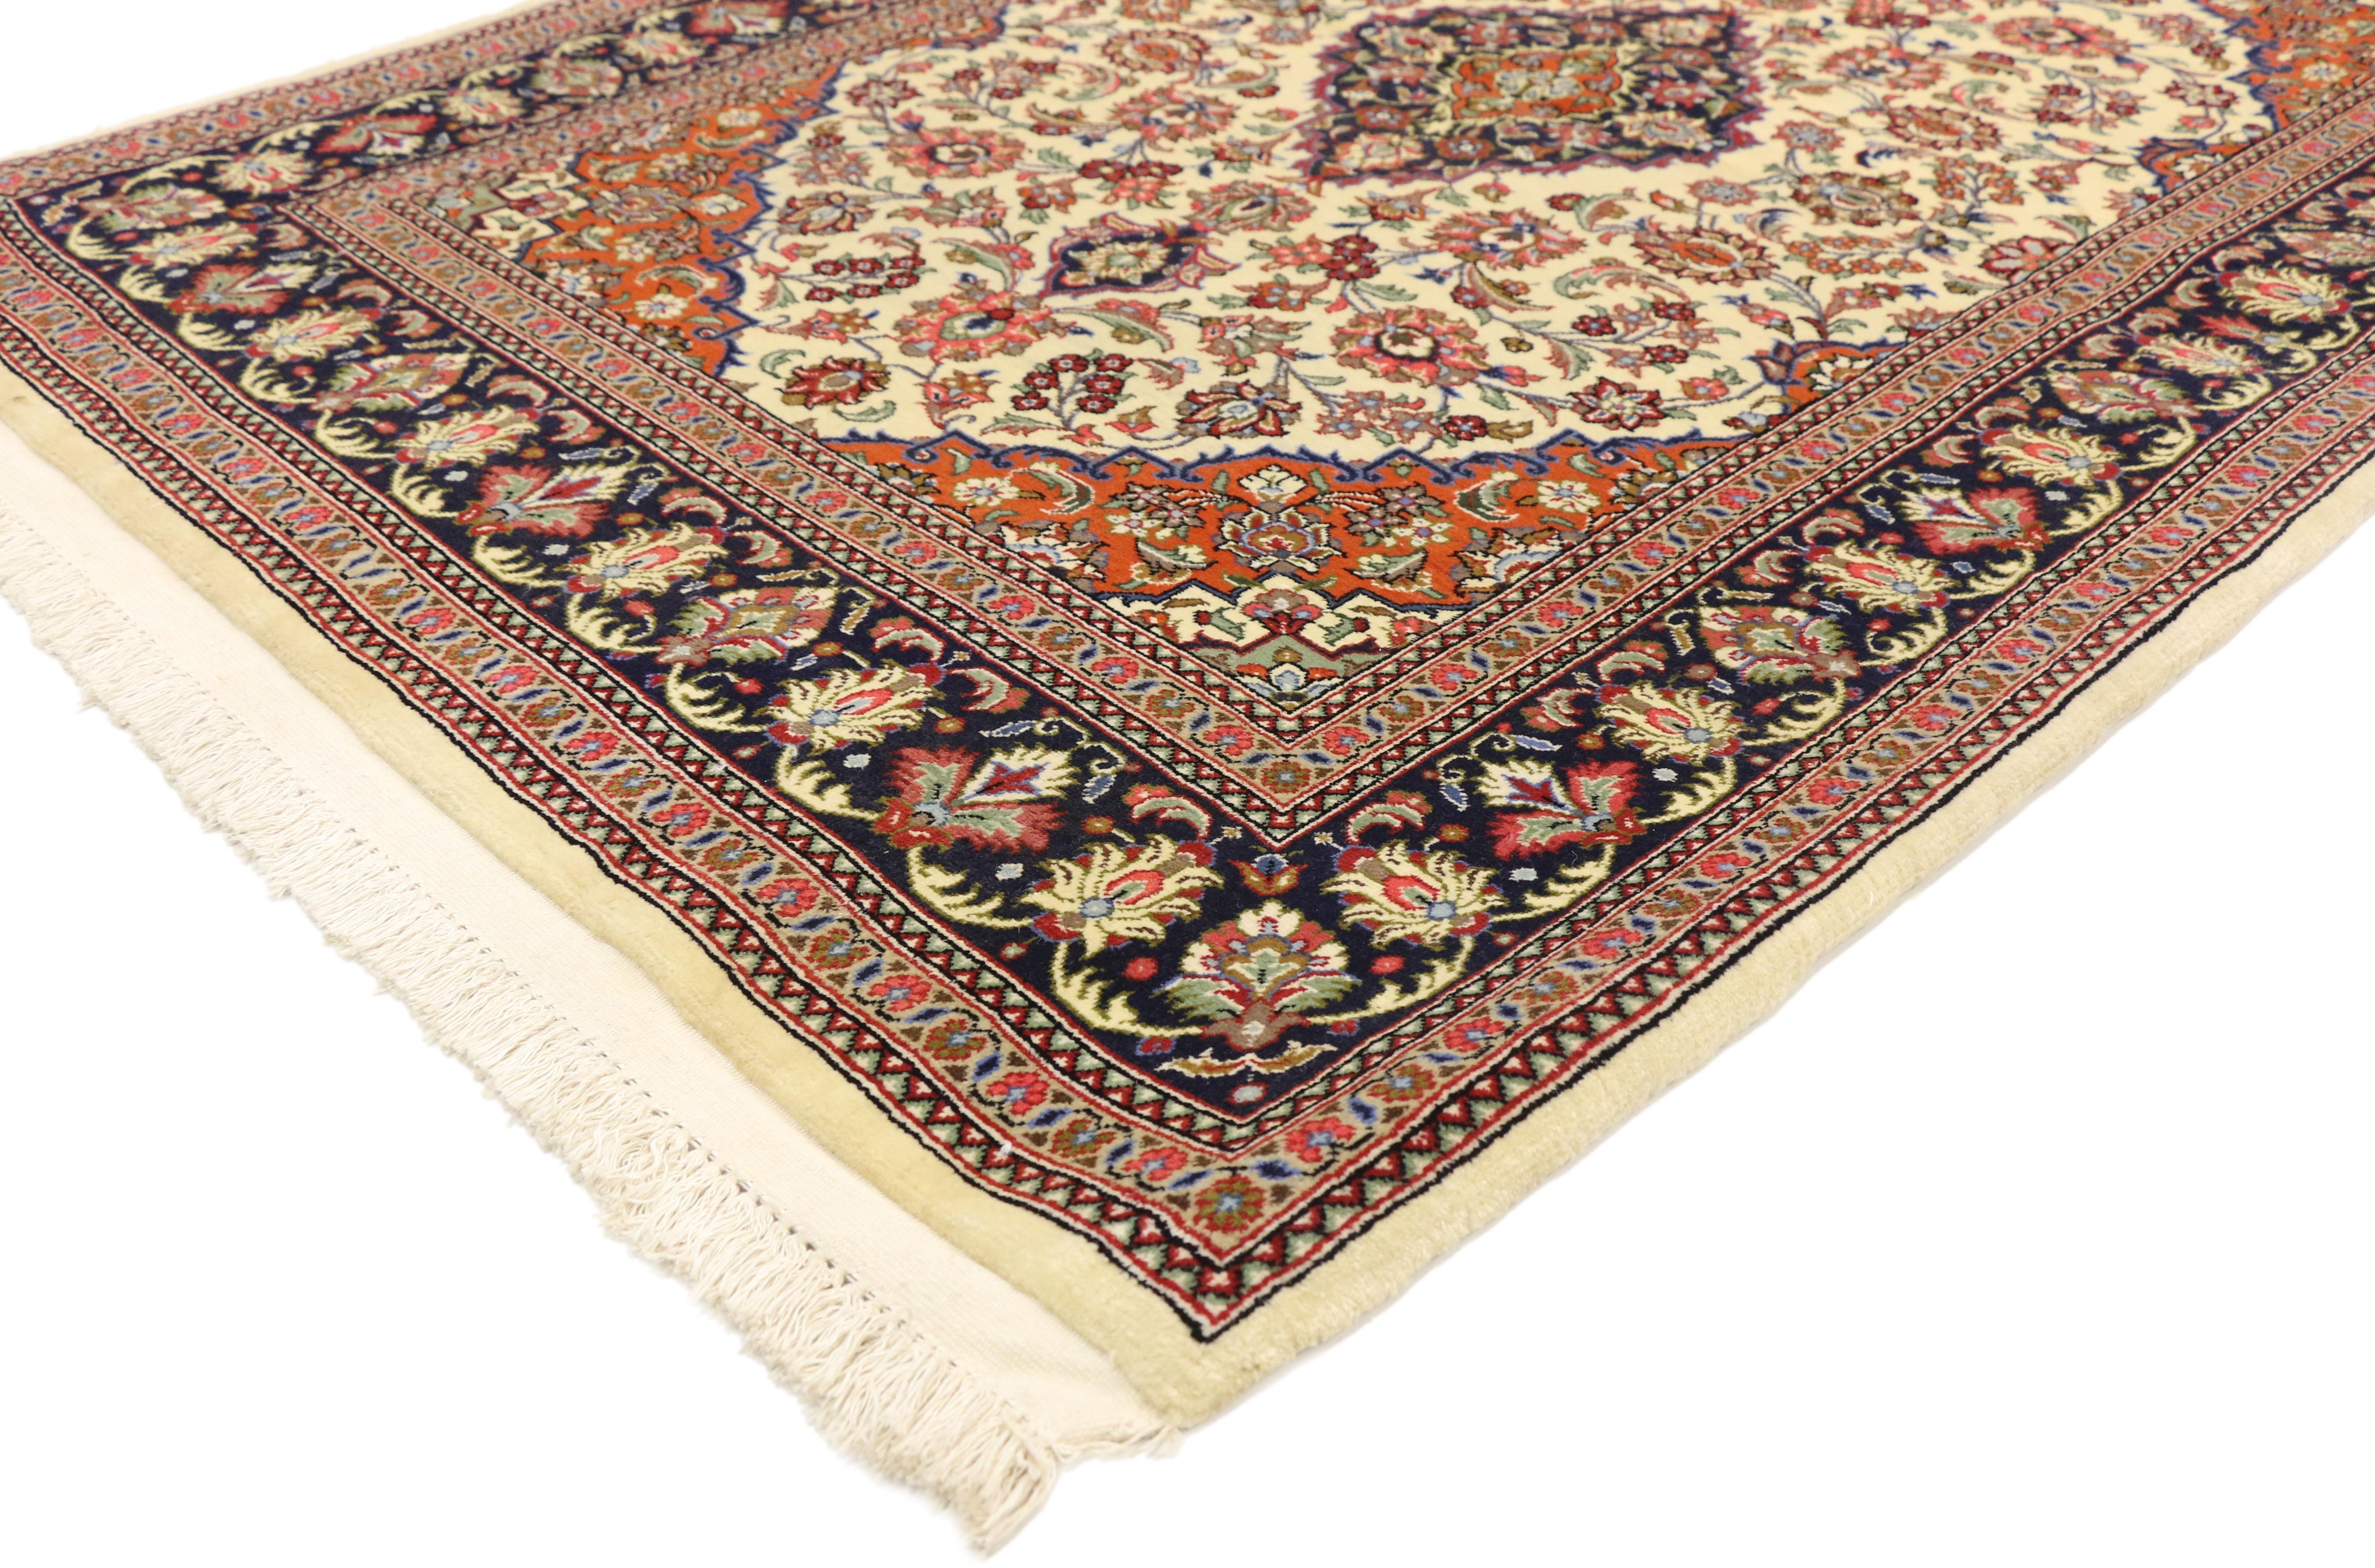 74586 Vintage Persian Qum Silk Rug with with French Rococo Style. This vintage Persian Qum silk rug with traditional style features a centre medallion and elaborate spandrels with an all-over pattern surrounded by a classic border creating a